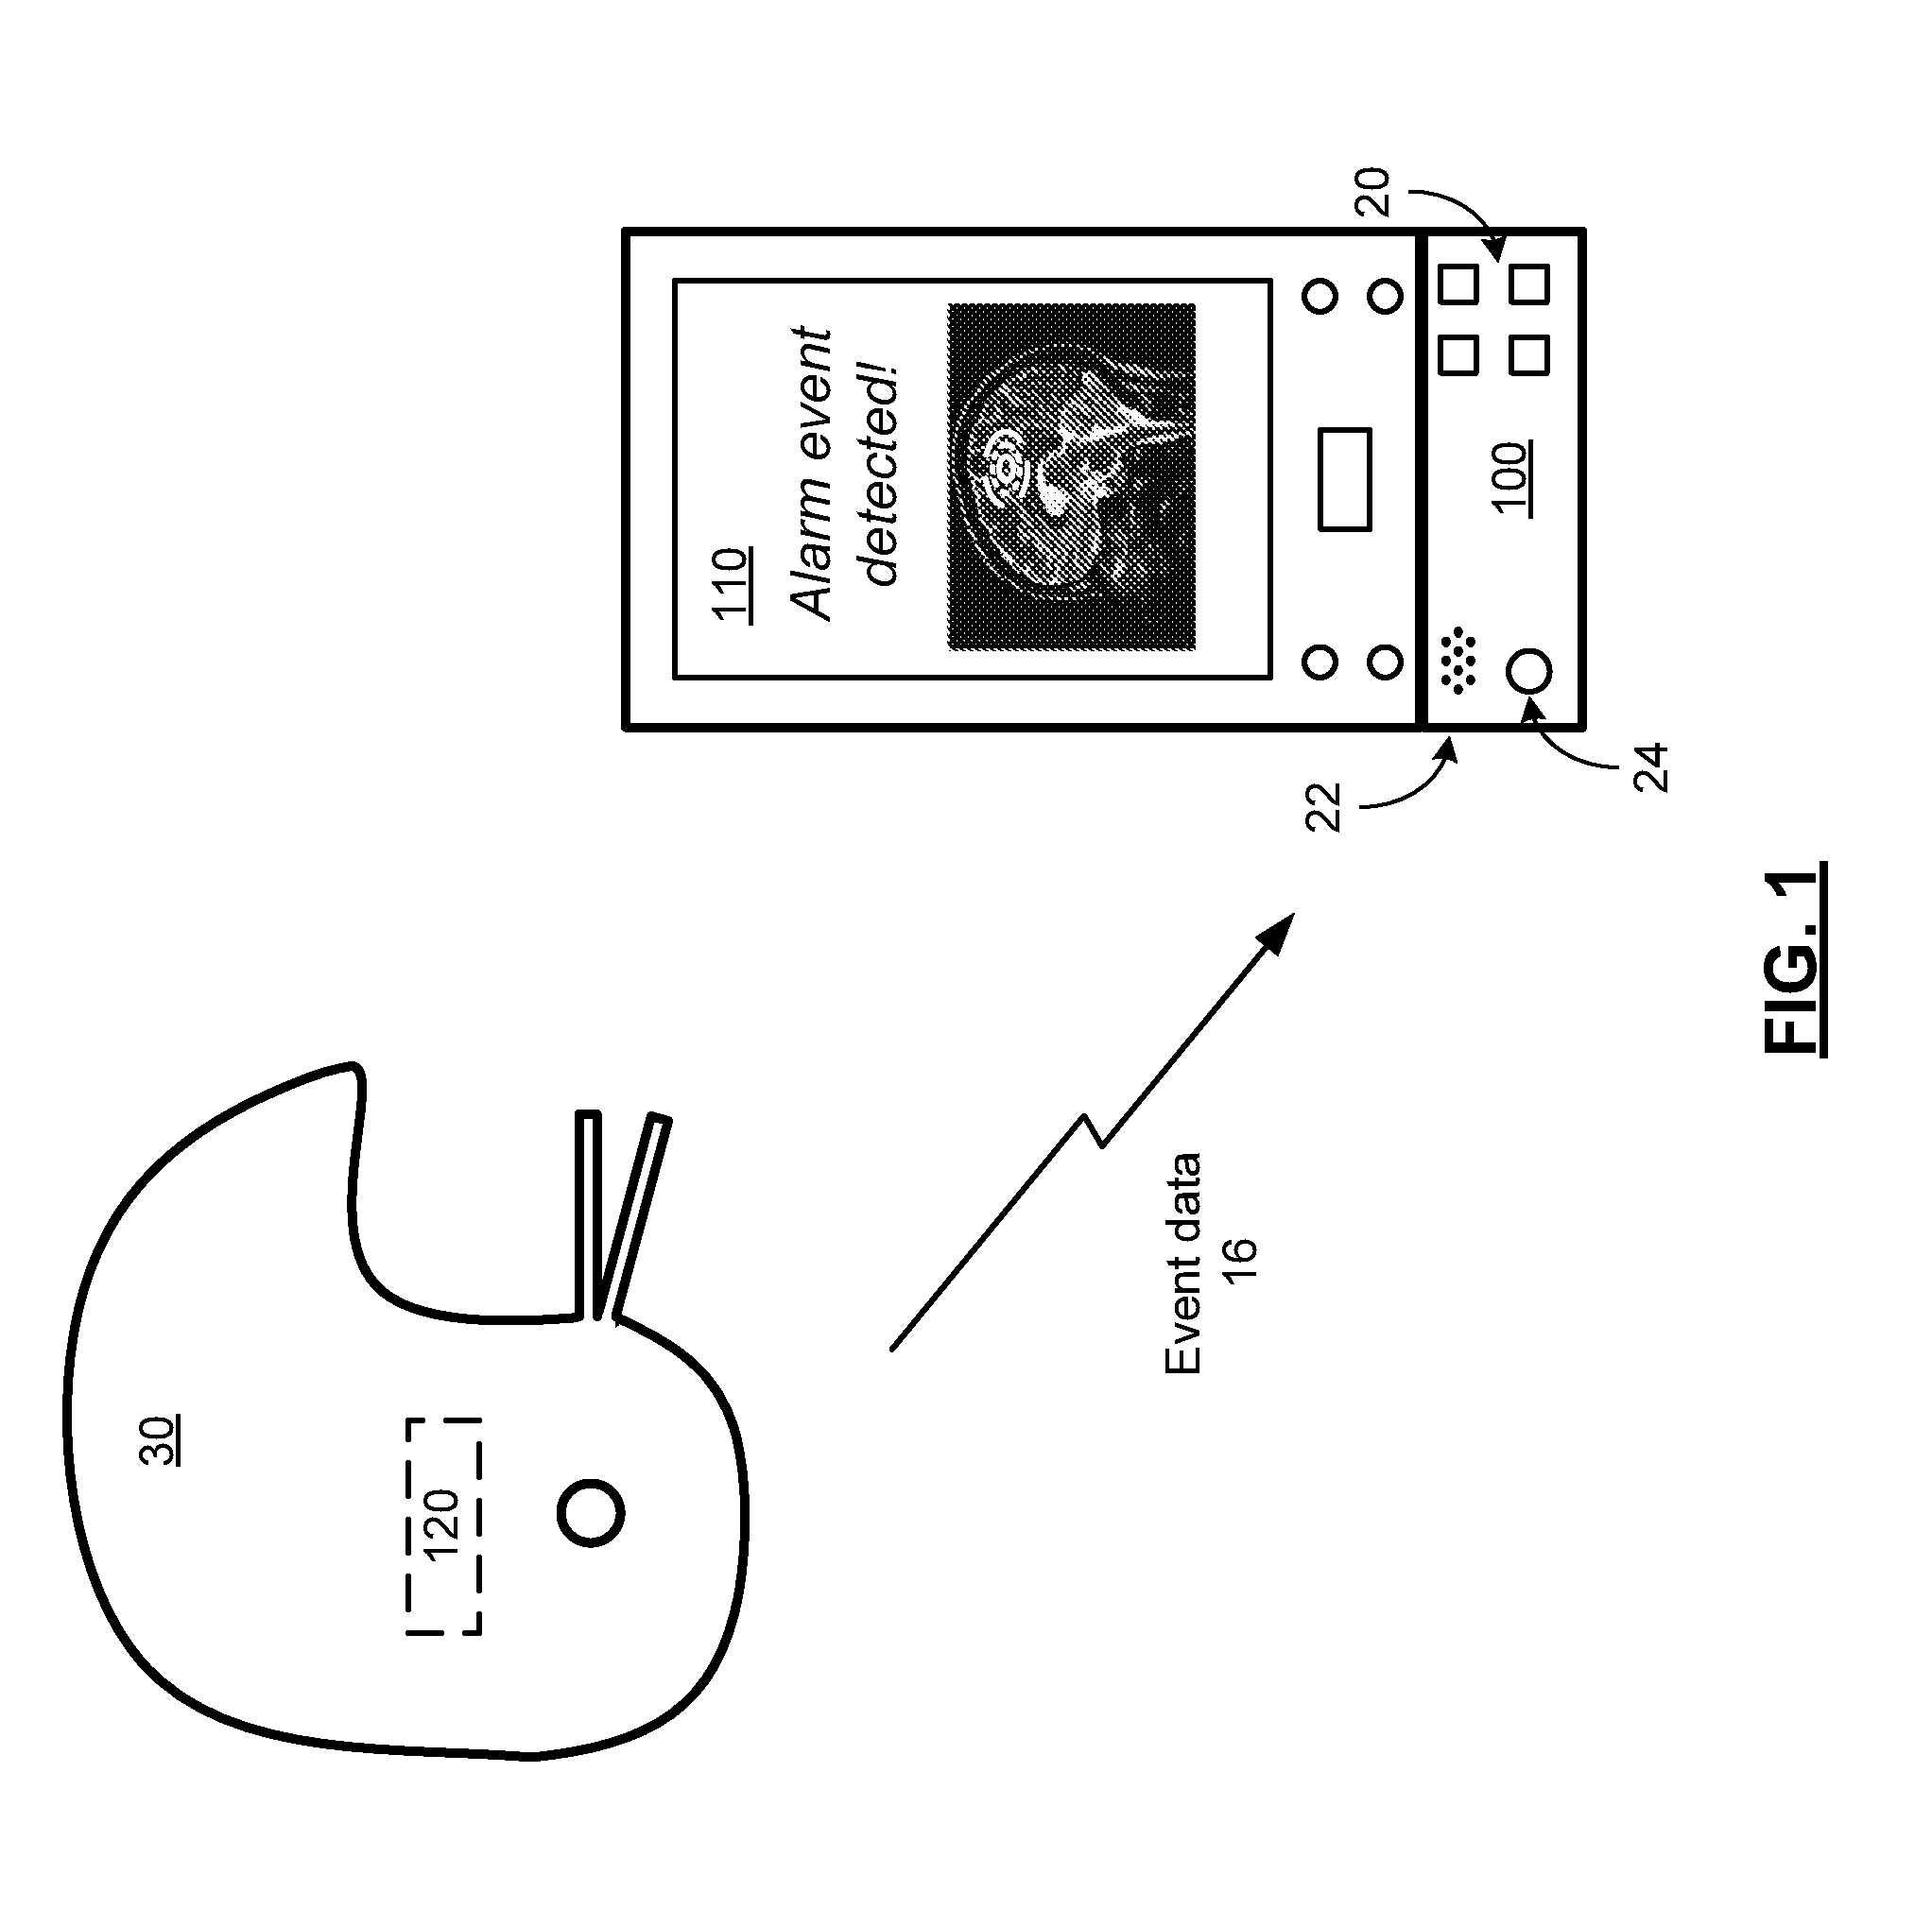 Bridge device for use in a system for monitoring protective headgear